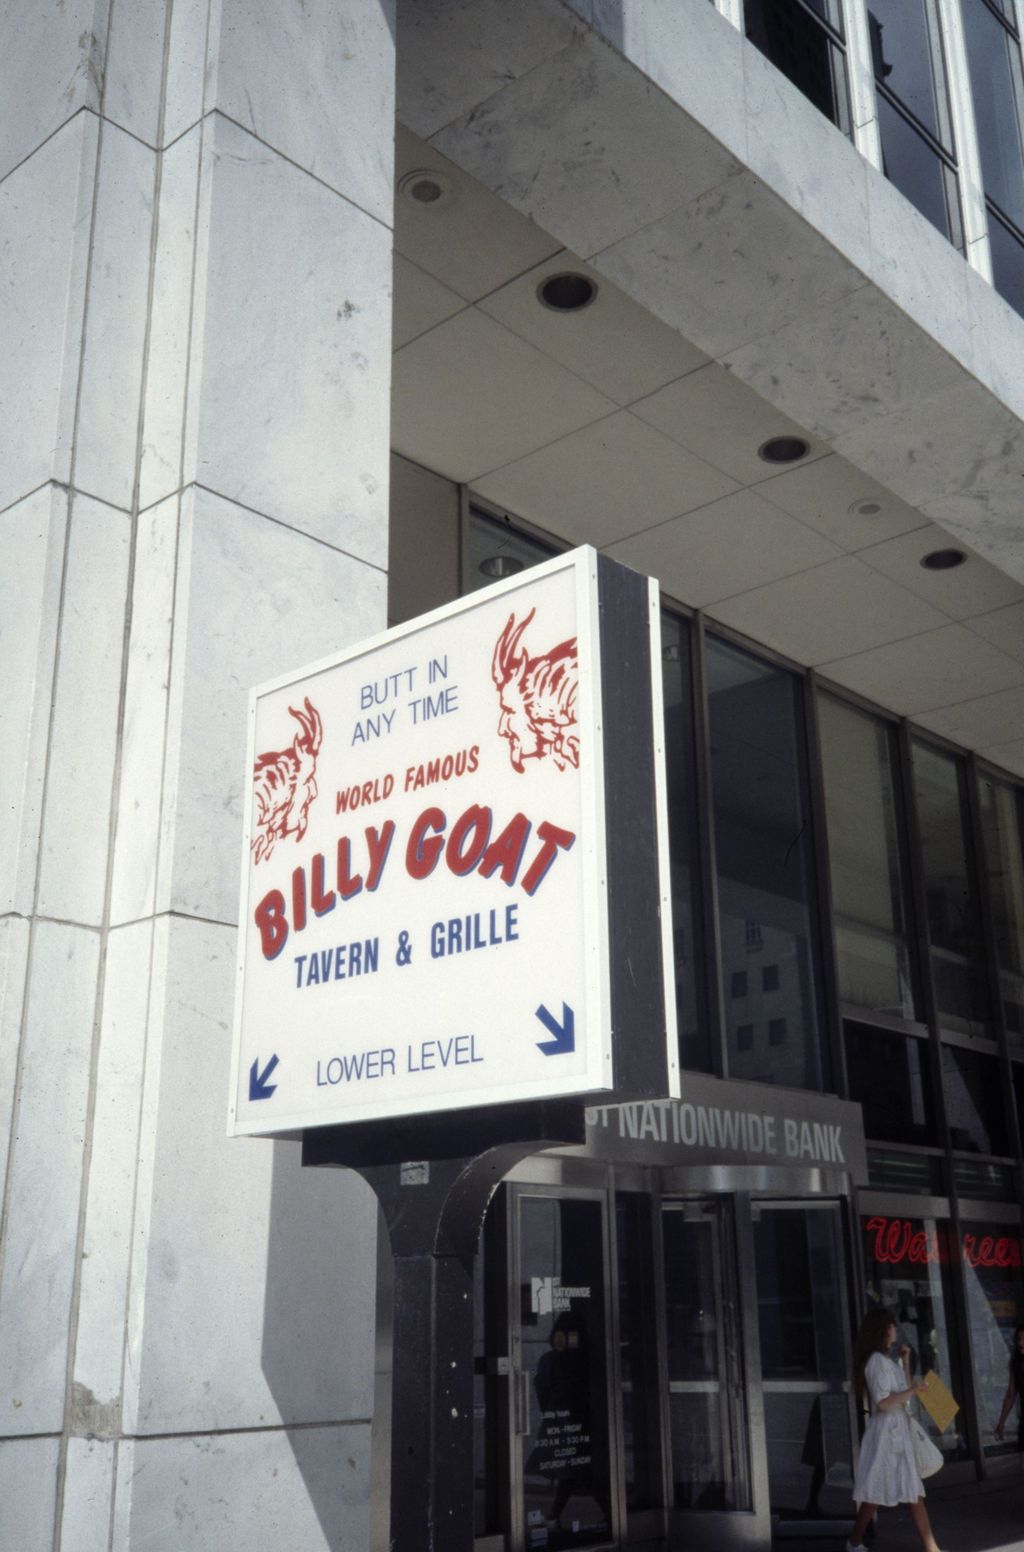 Miniature of Billy Goat Tavern & Grille sign